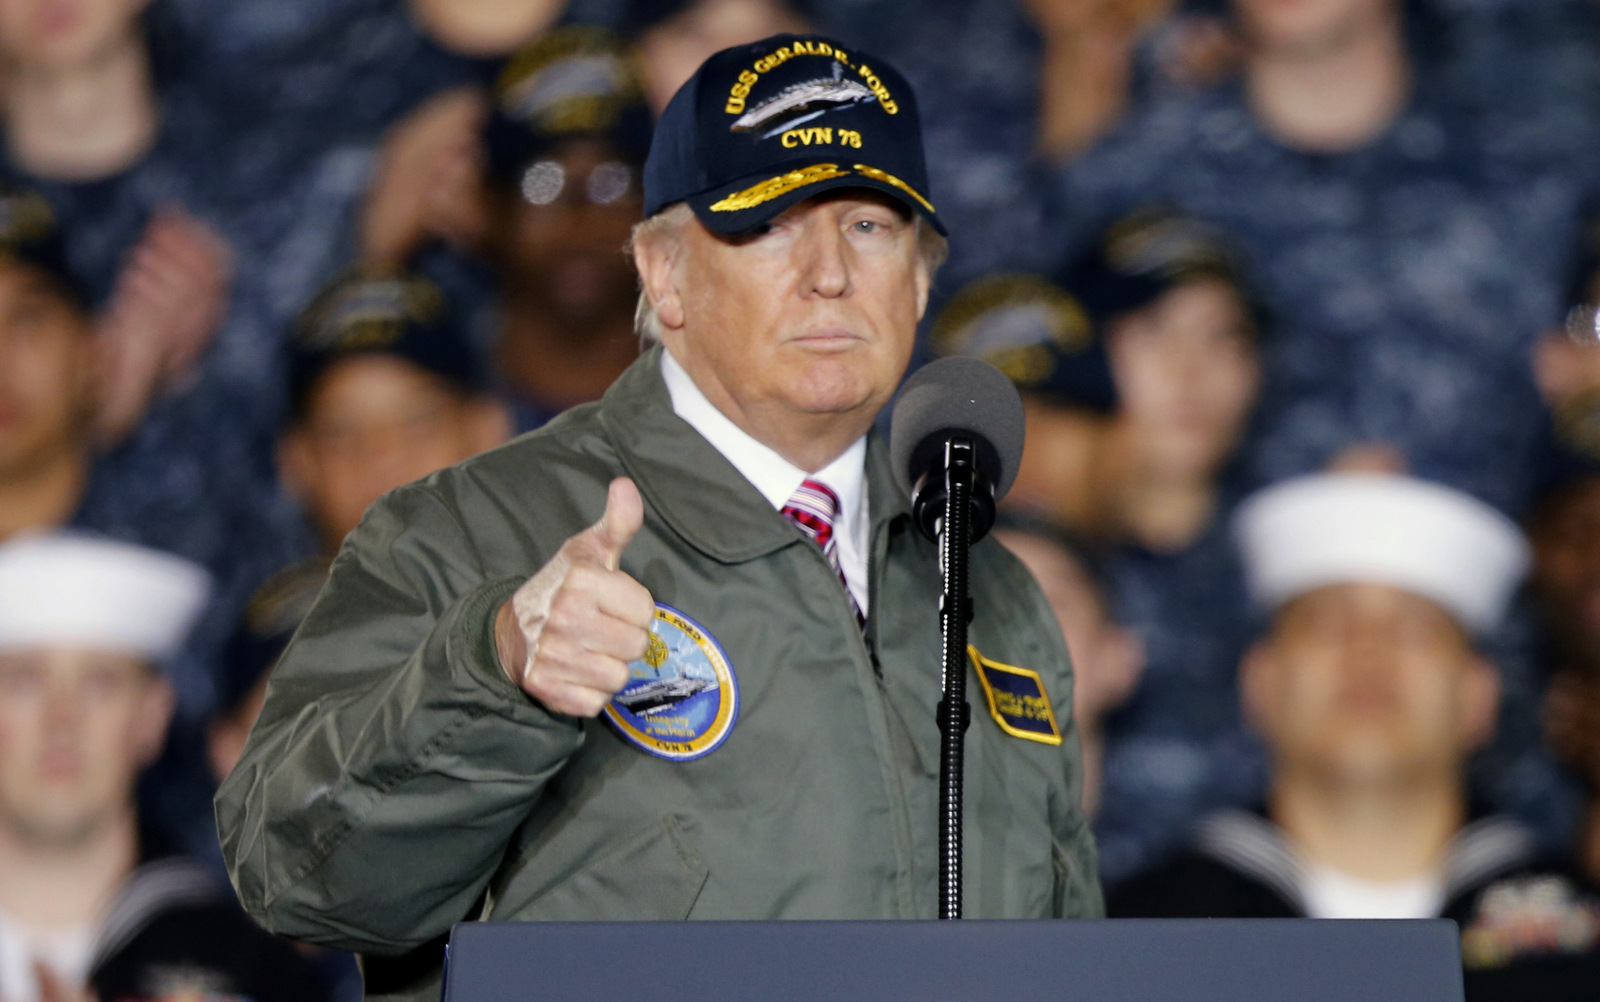 Speaking Loudly and Carrying a Big Stick: Trump’s Military Increase Isn’t Sustainable